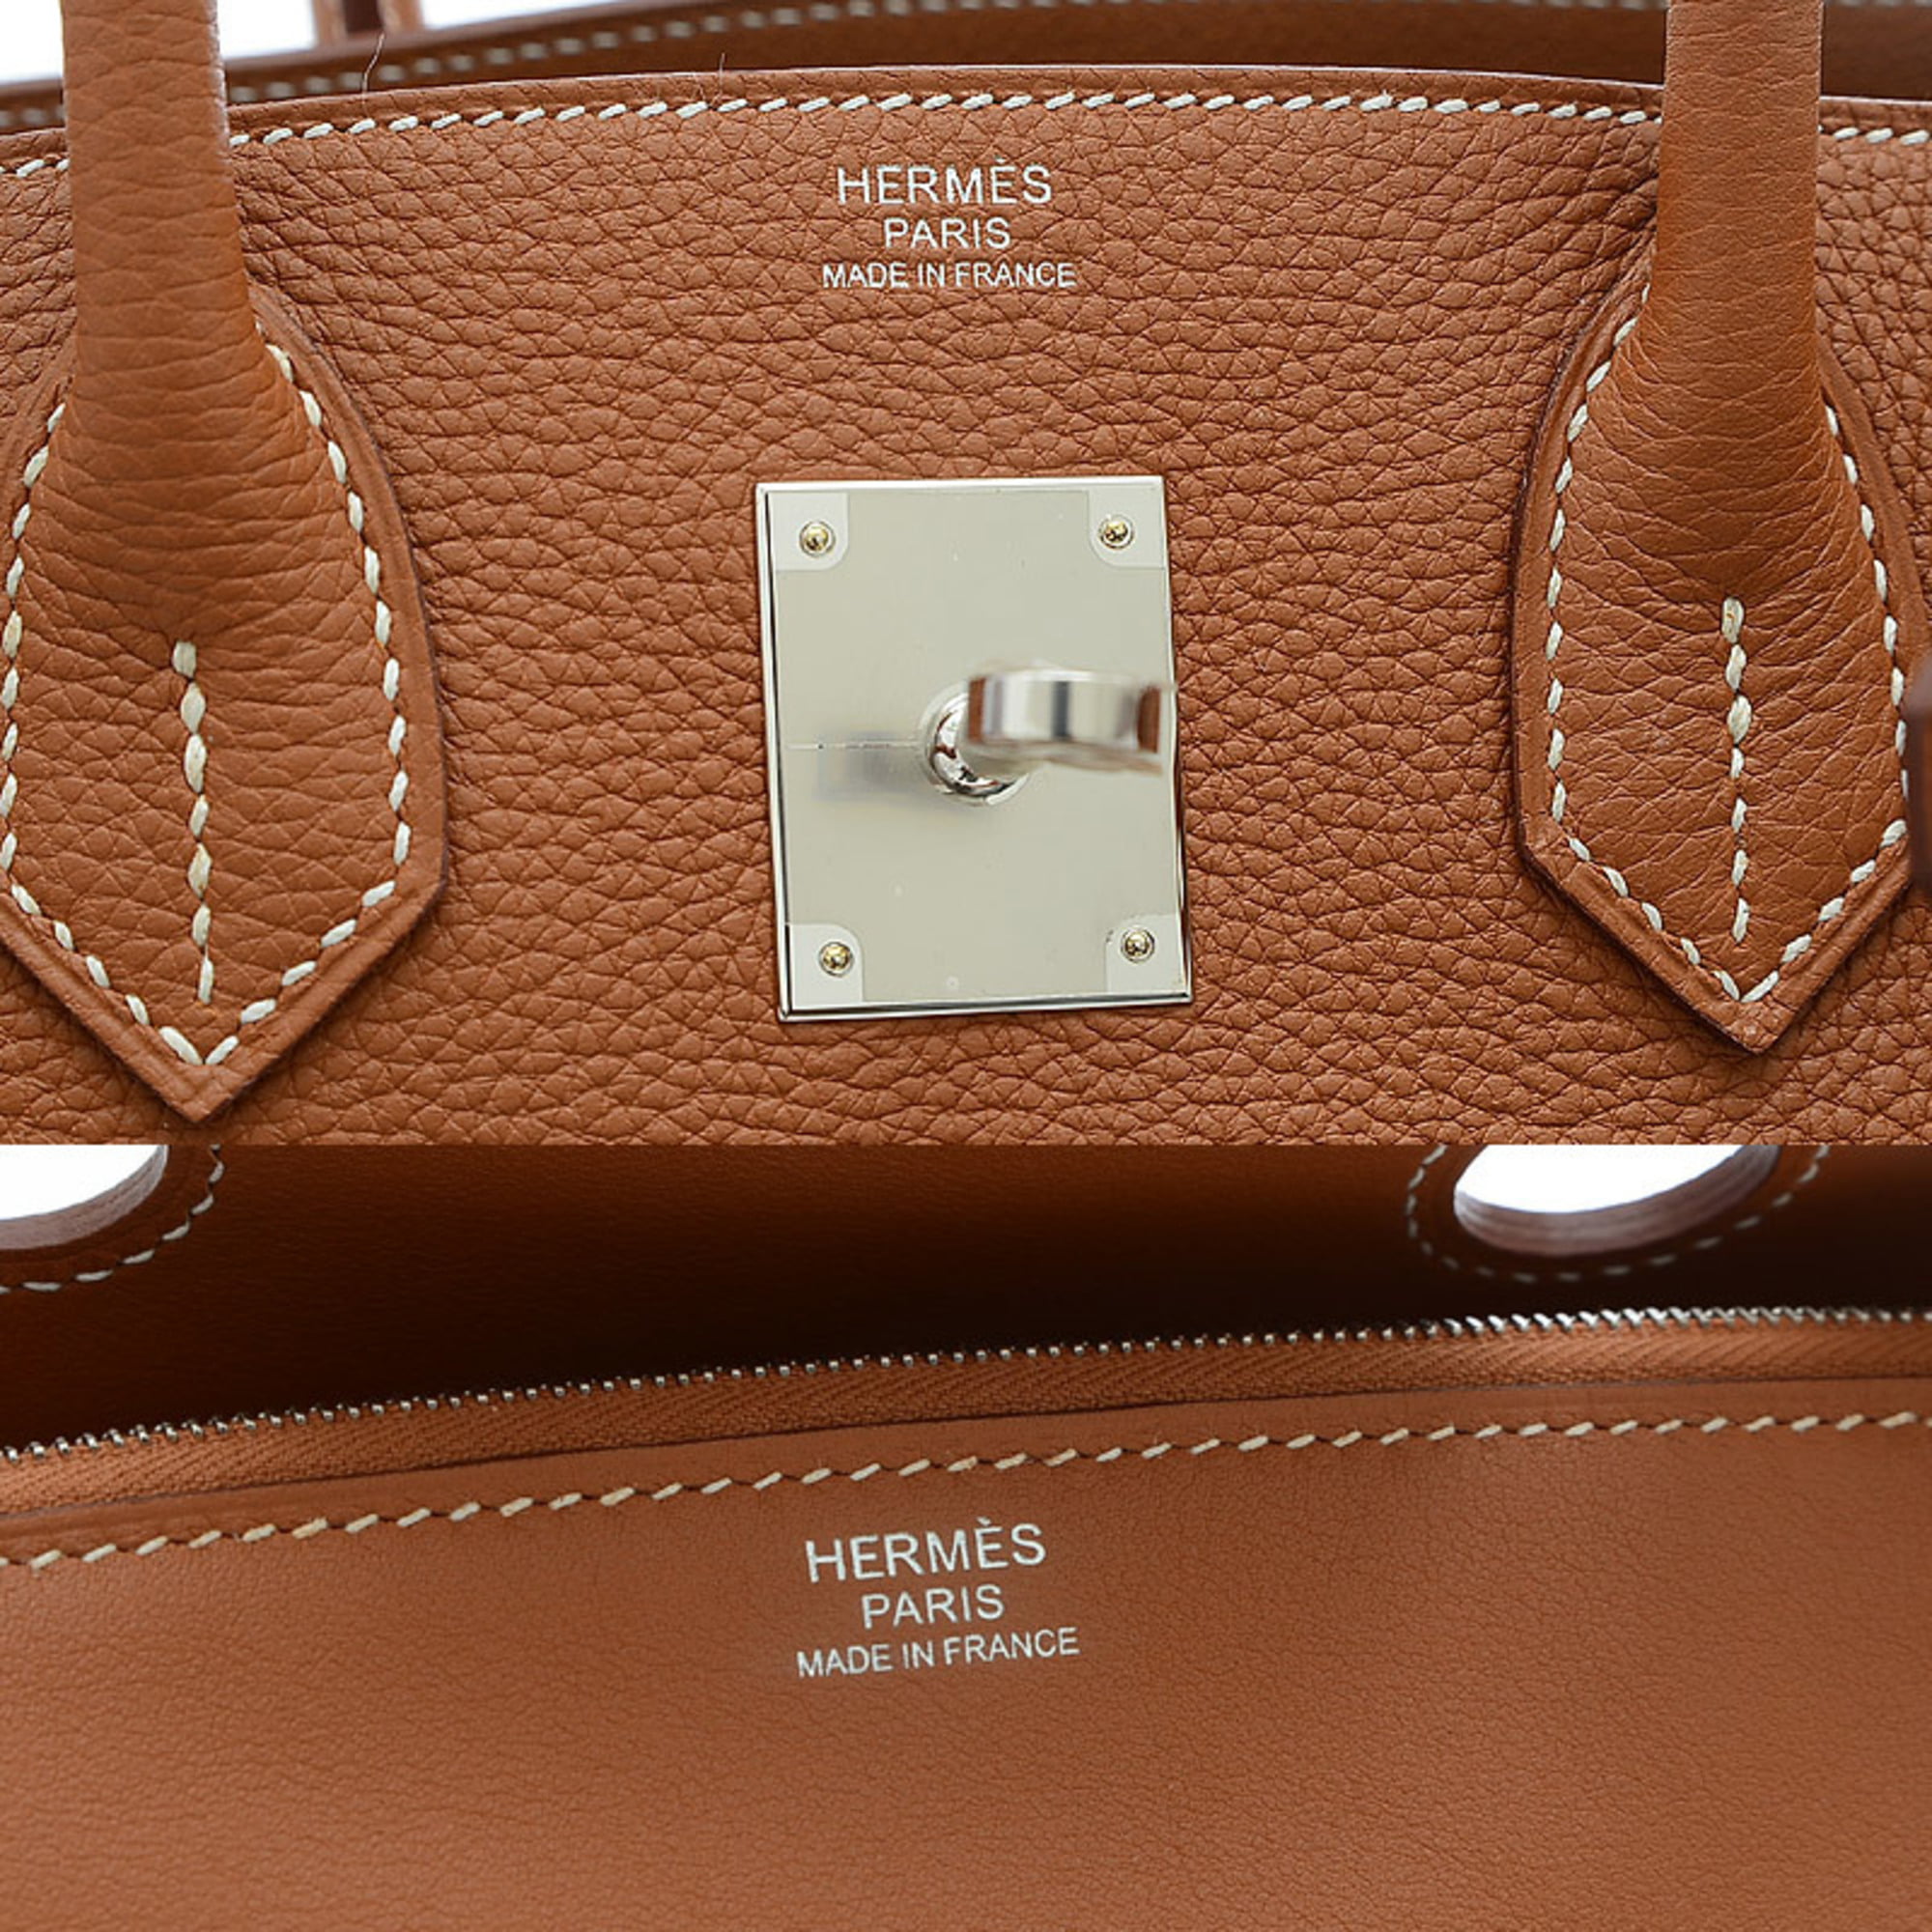 Hermes Birkin 30 3 In 1 Bag In Biscuit Togo, Swift, And Canvas With Gold  Hardware